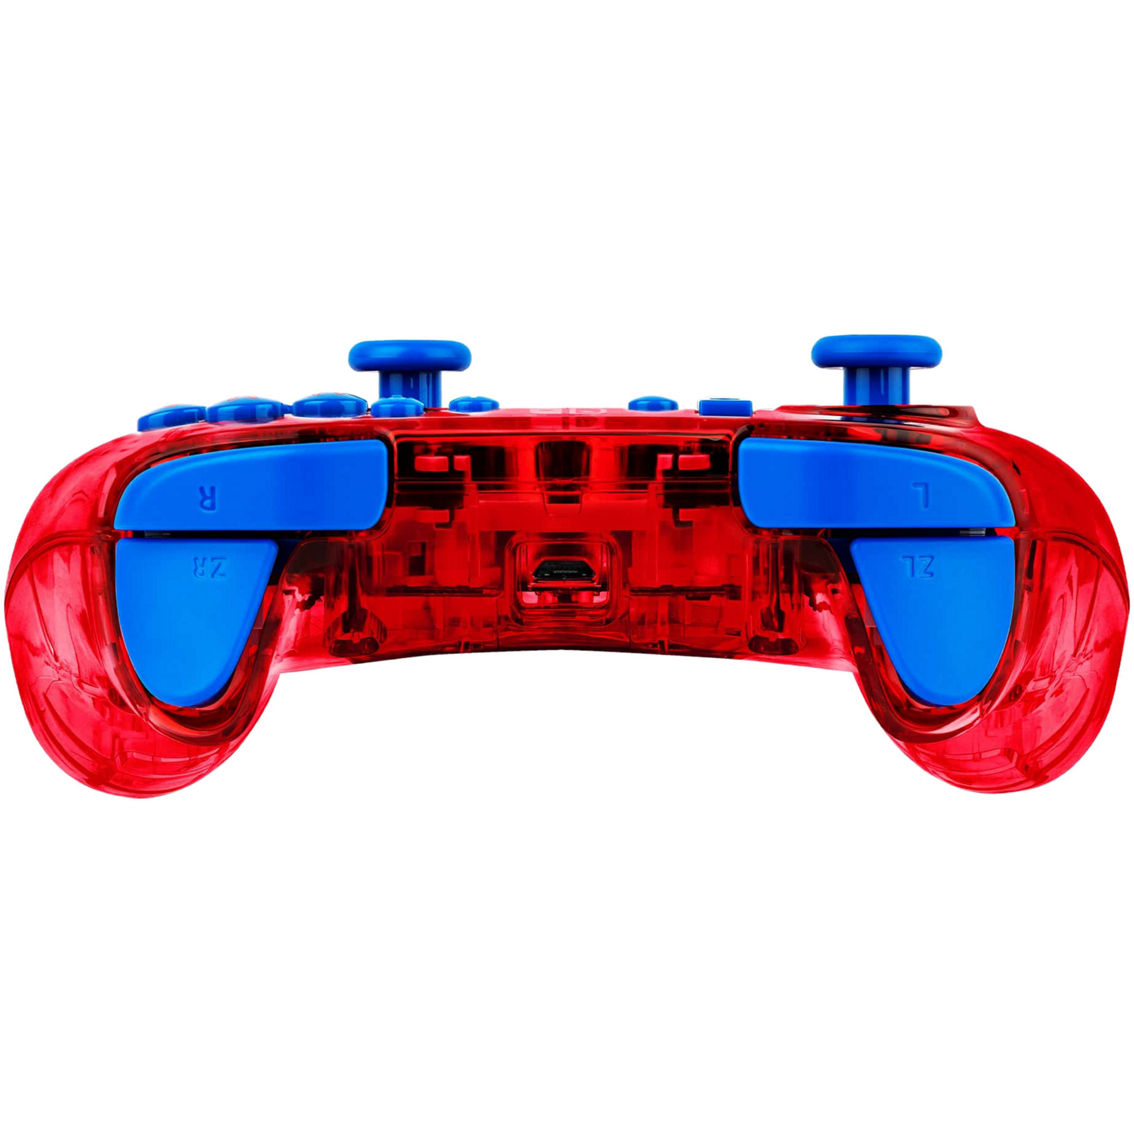 PDP Rock Candy Wired Controller: Mario Punch For Nintendo Switch - Image 7 of 9